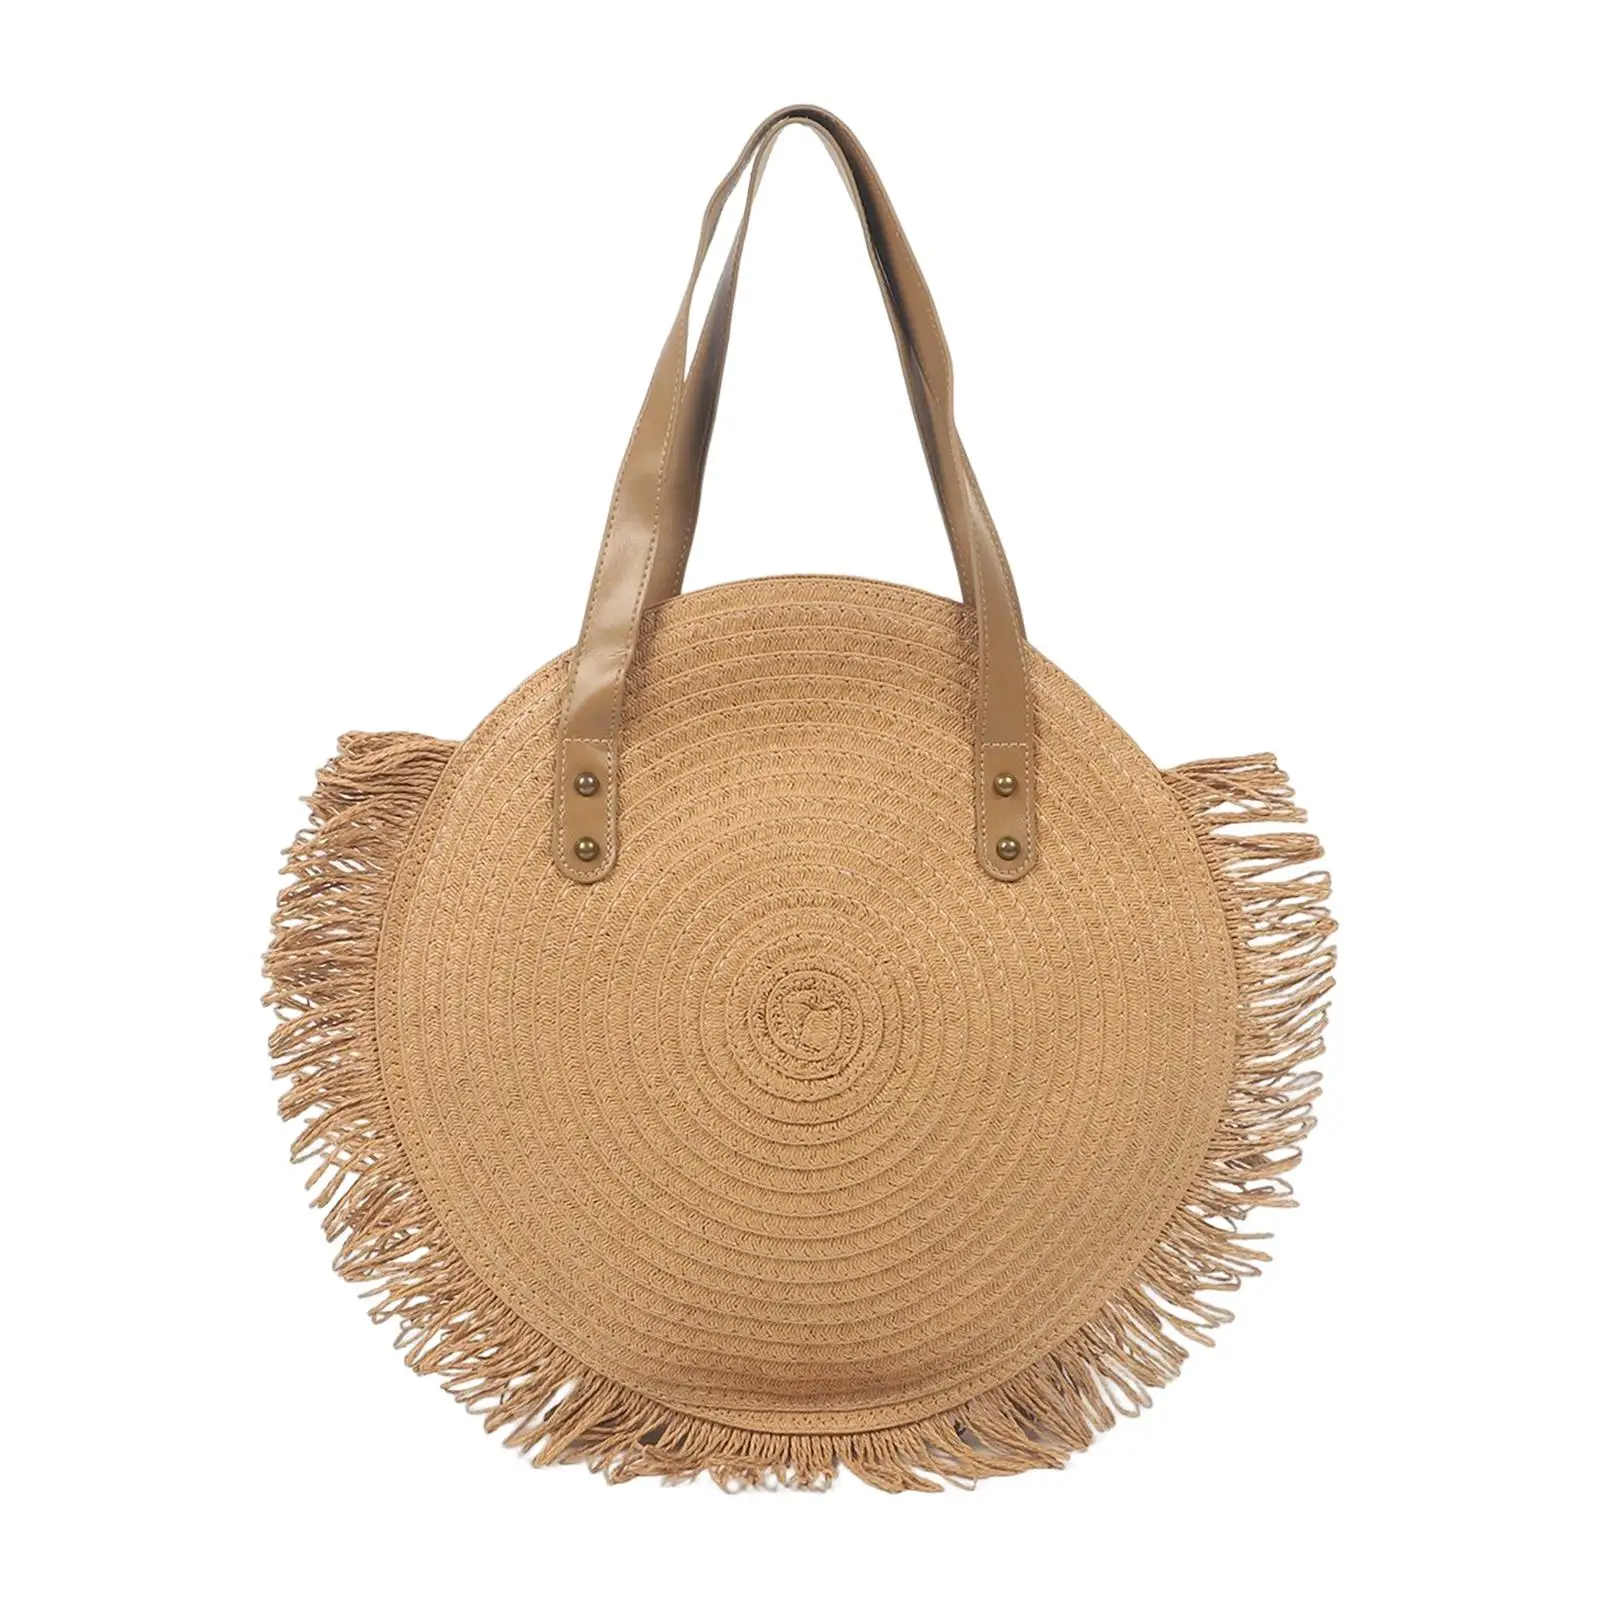 Round Straw Bag Handwoven Boho Tote Shoulder Bag for Vacation Summer Beach